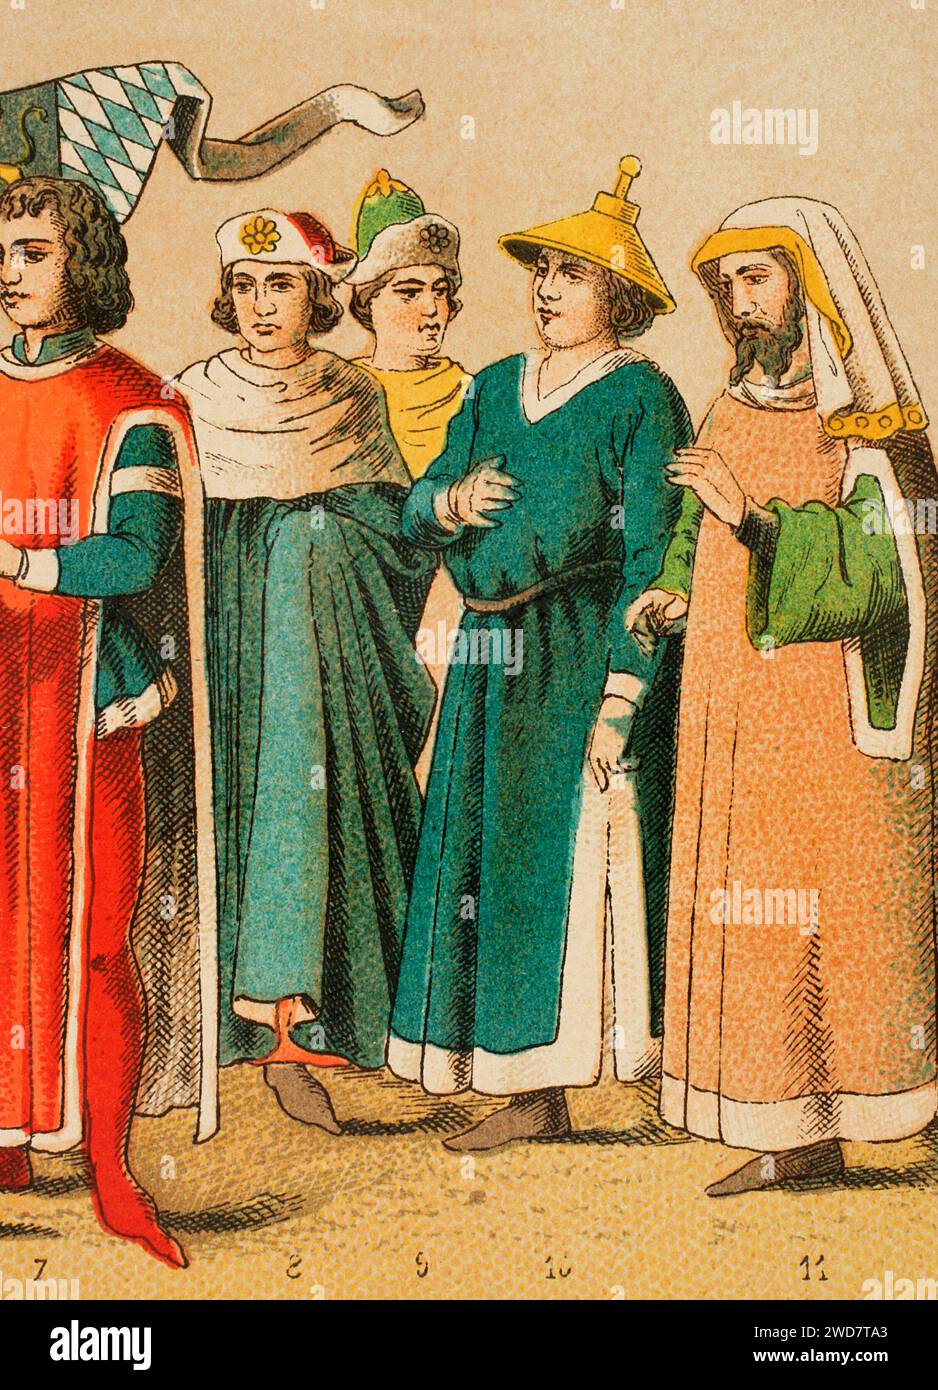 History of Germany. Middle Ages. 1400-1450. From left to right, 7: Duke of Bavaria, 8-9: university costumes, 10-11: Jews. Chromolithography. 'Historia Universal', by César Cantú. Volume VII, 1881. Stock Photo